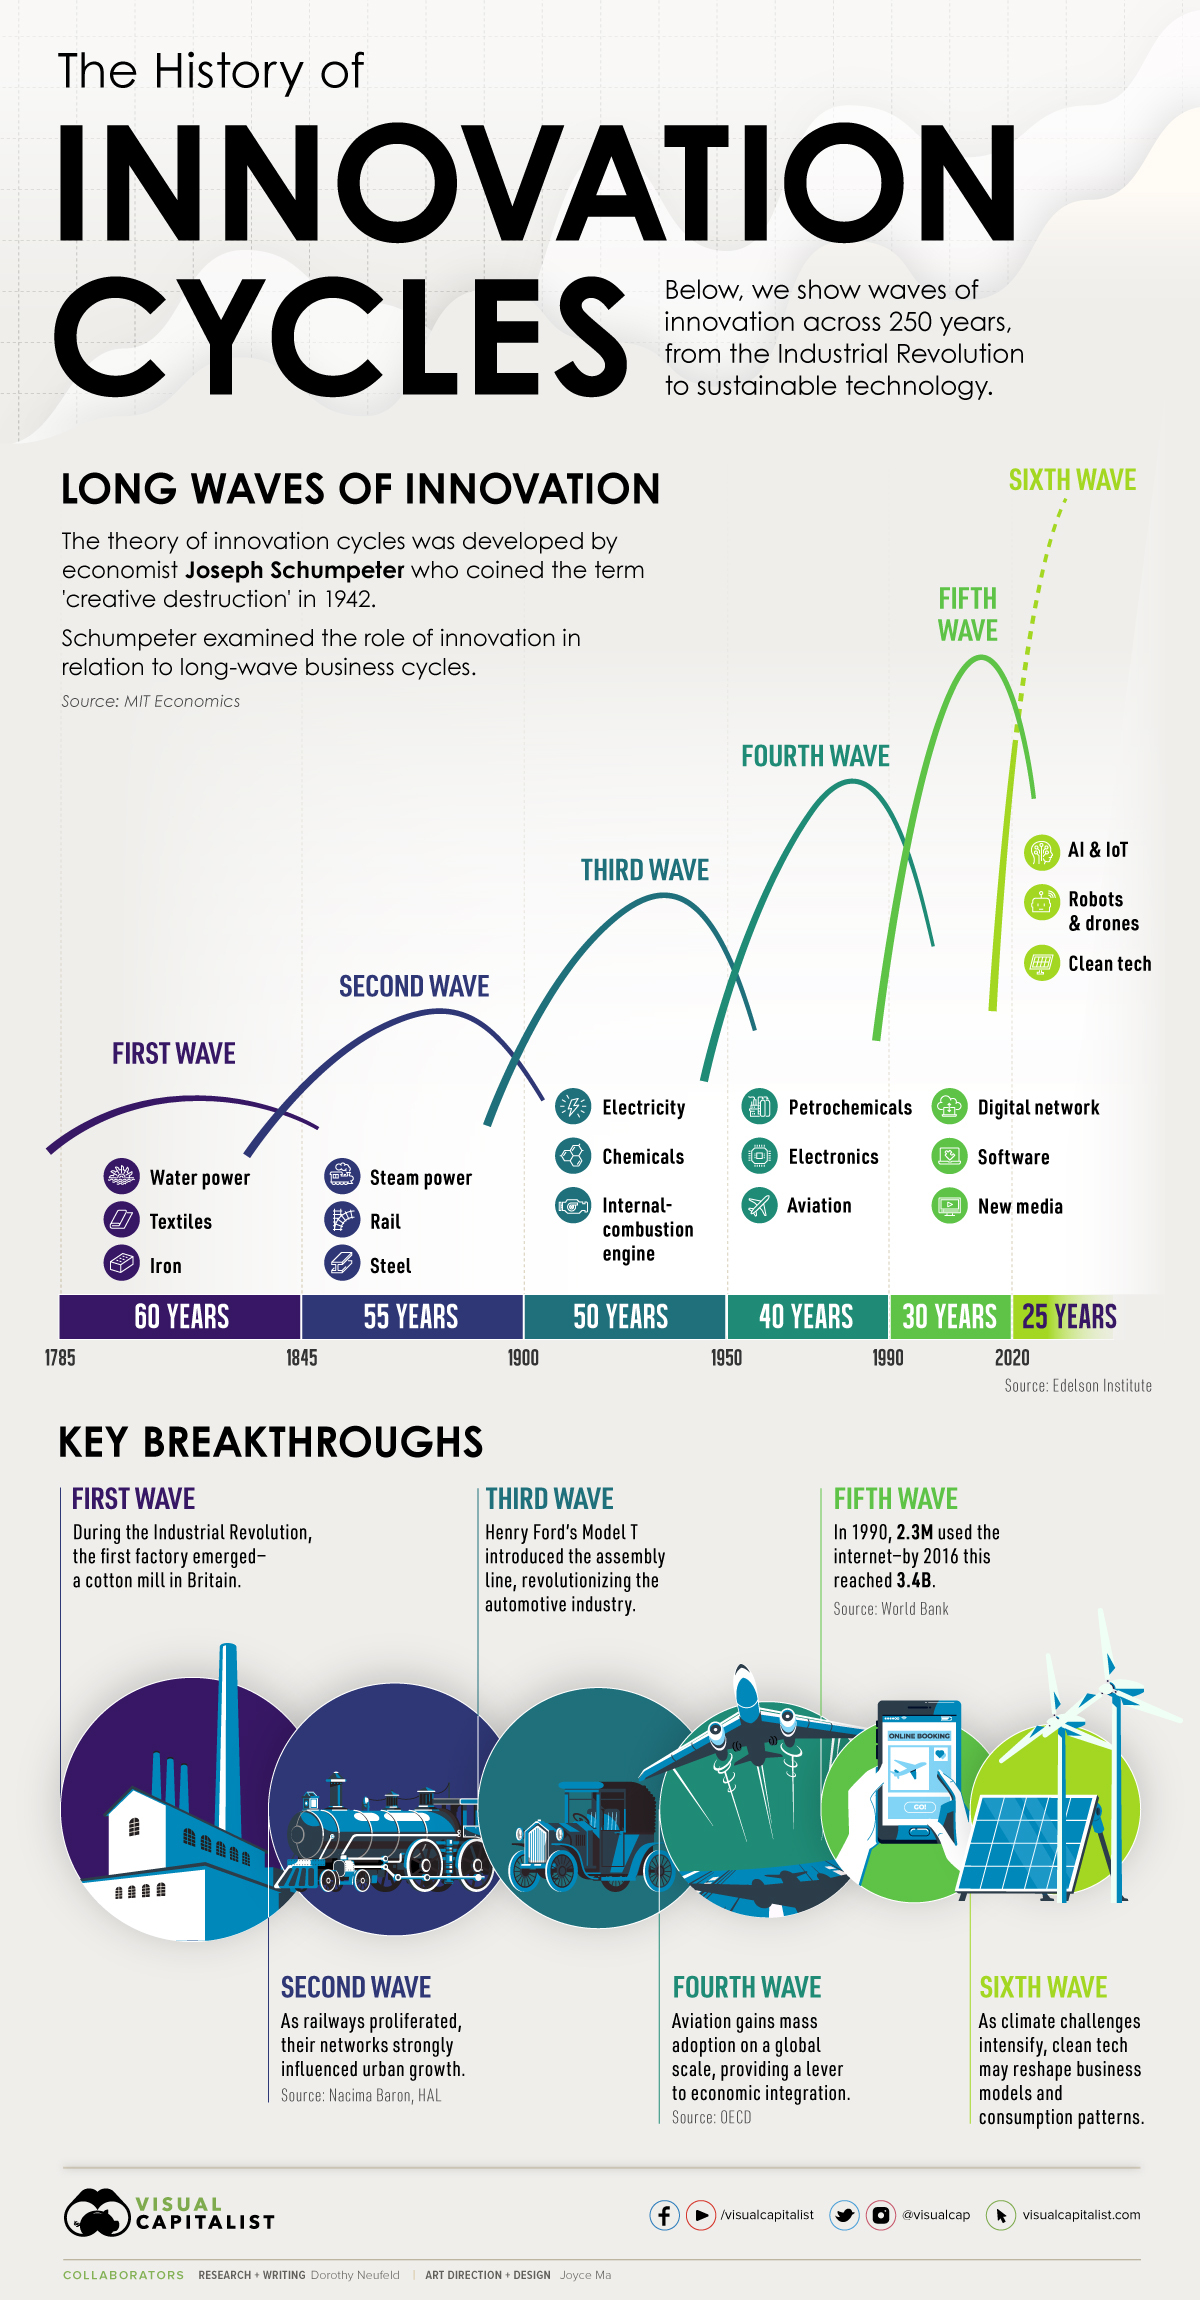 The History of Innovation Cycles - Infographic